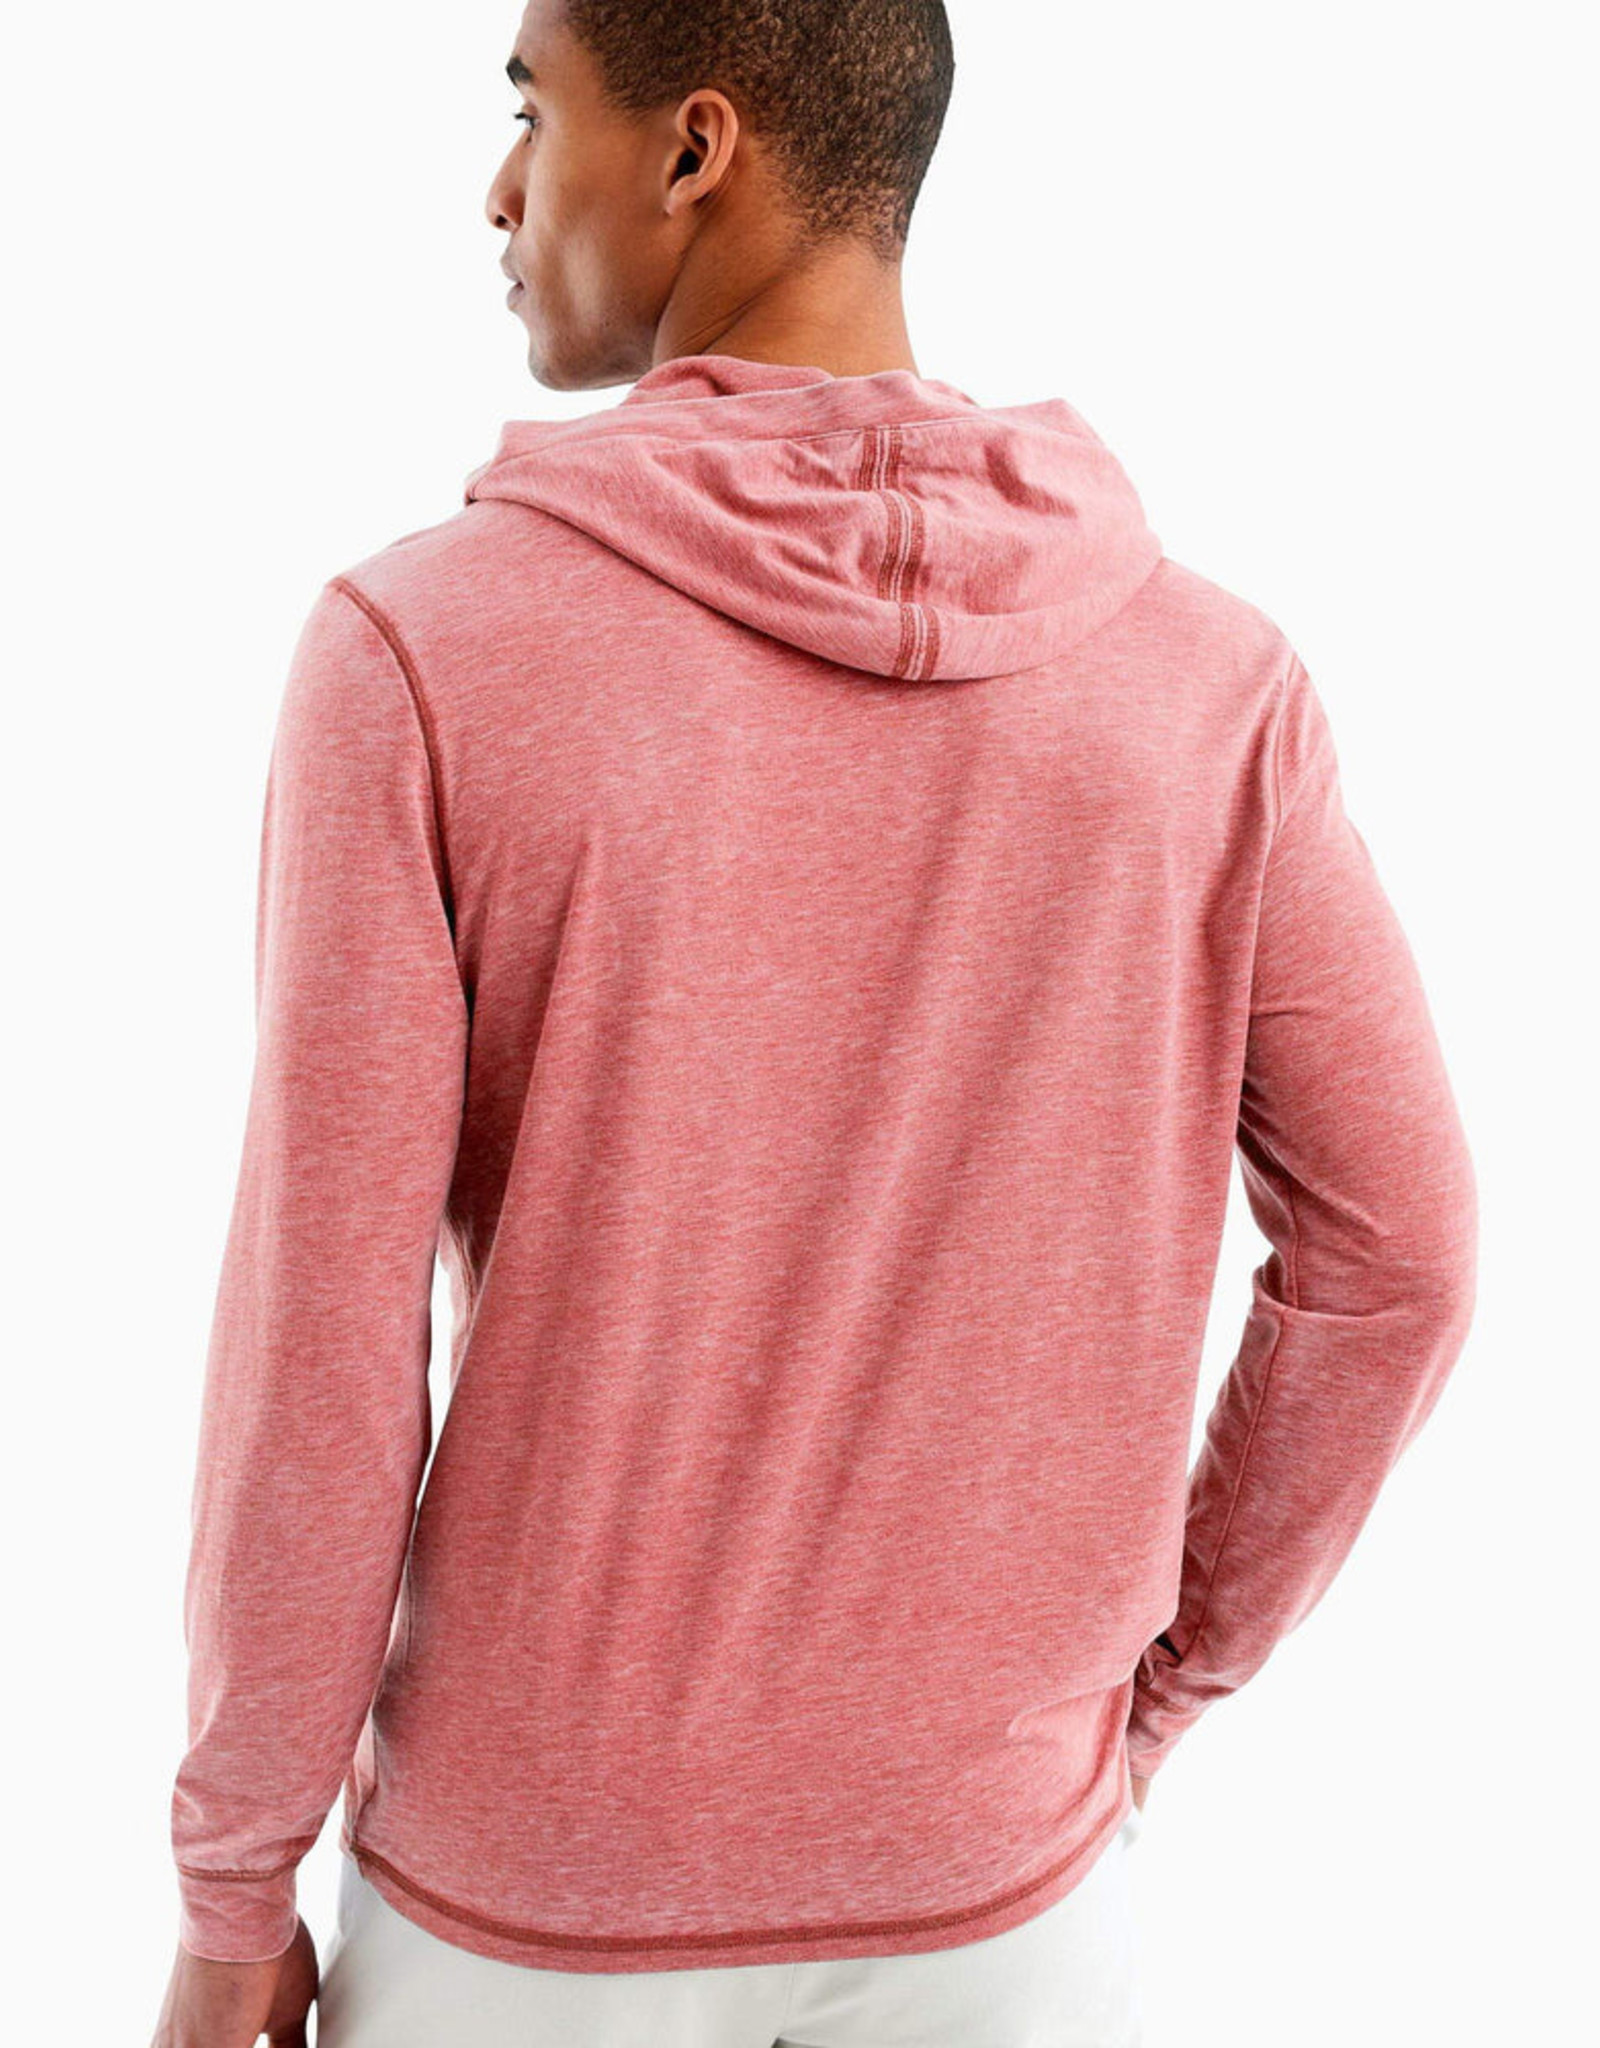 johnnie-O Zed 2 Button Hoody Pullover